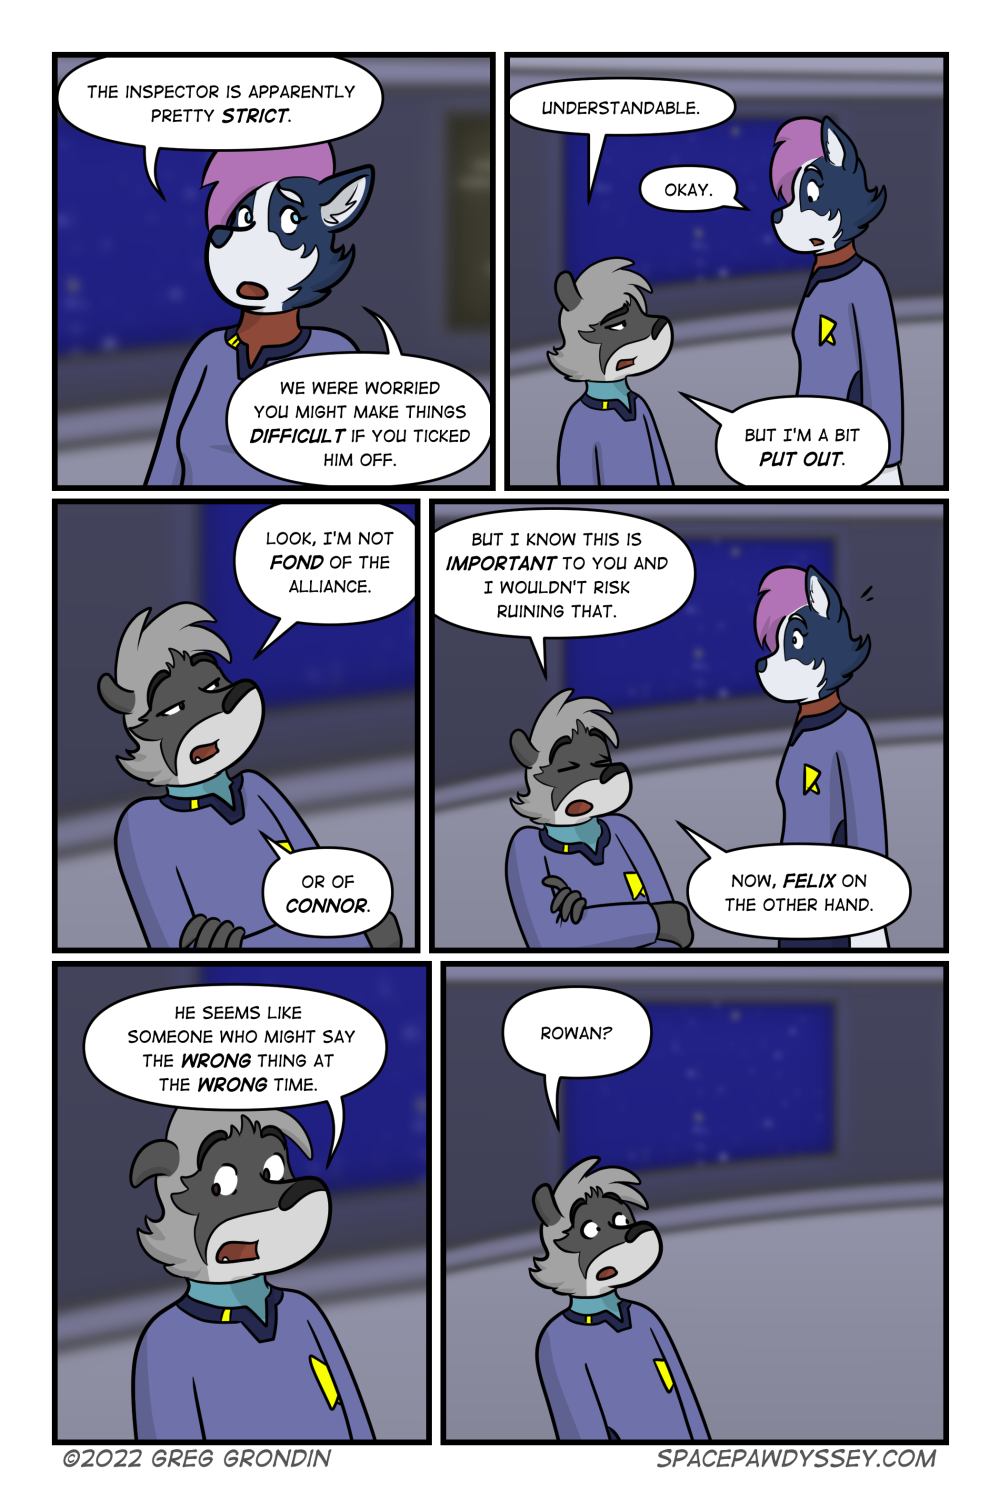 Space Pawdyssey #538